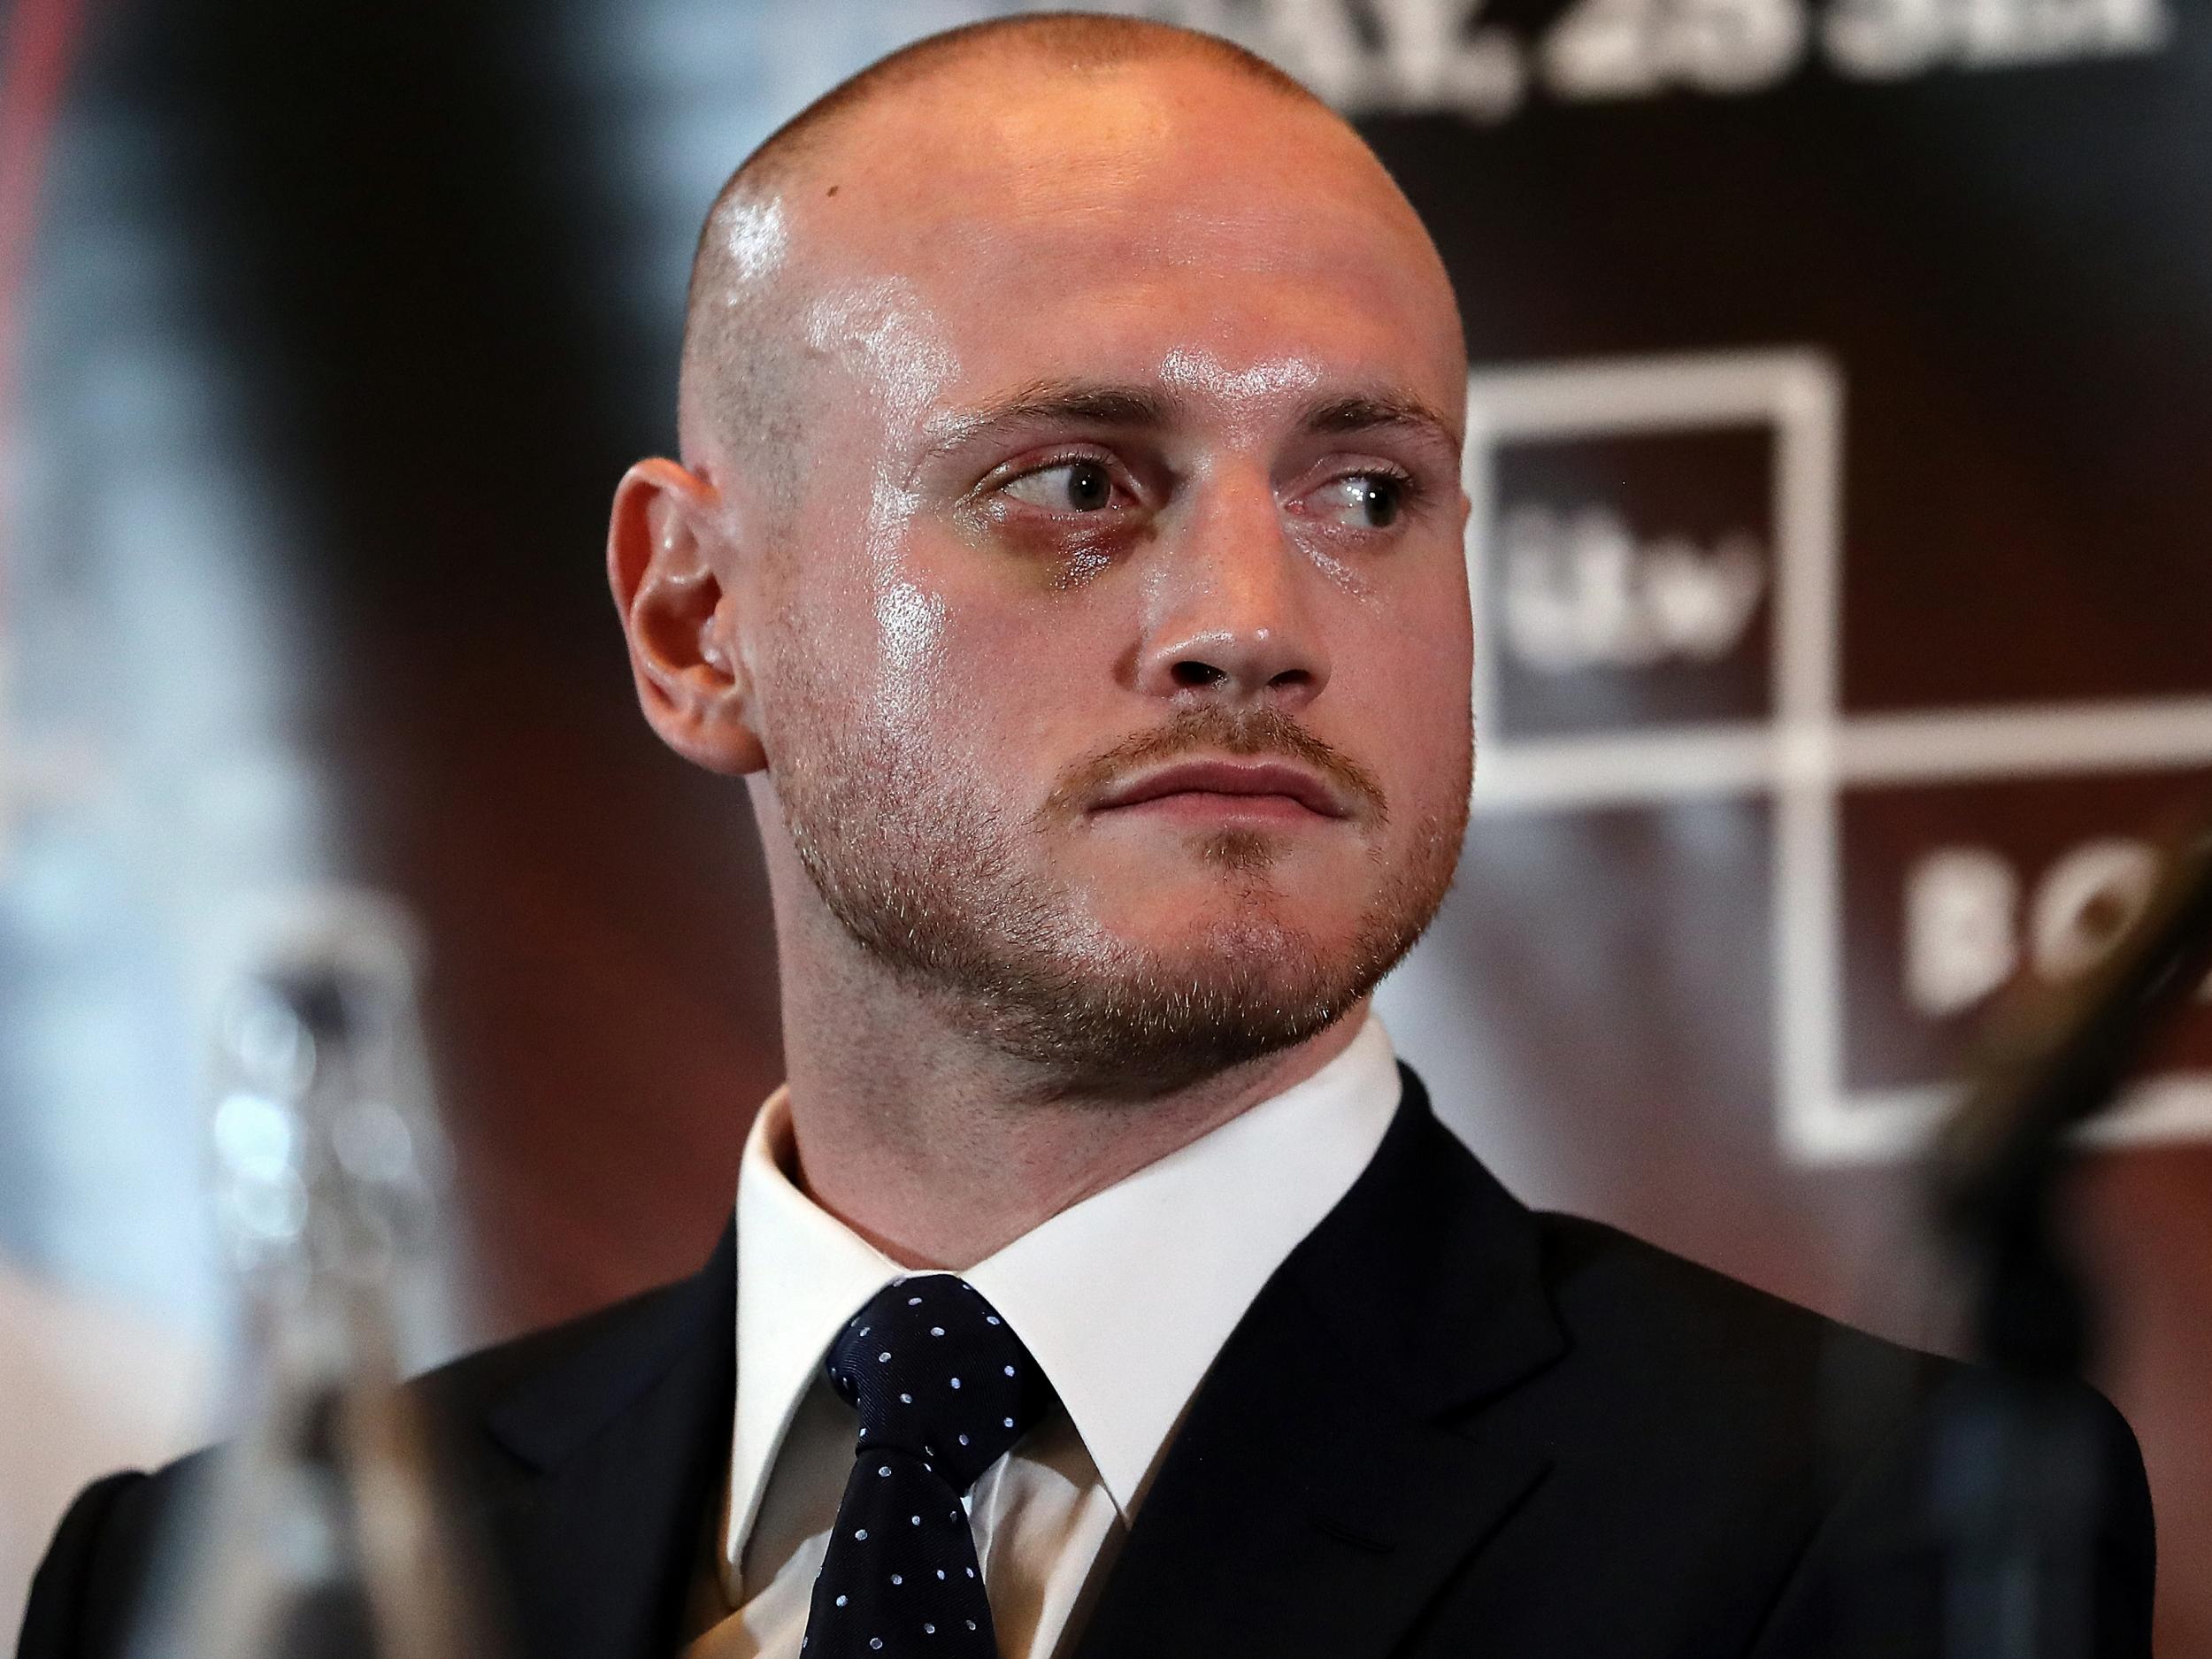 George Groves fights in the World Boxing Super Series final this weekend